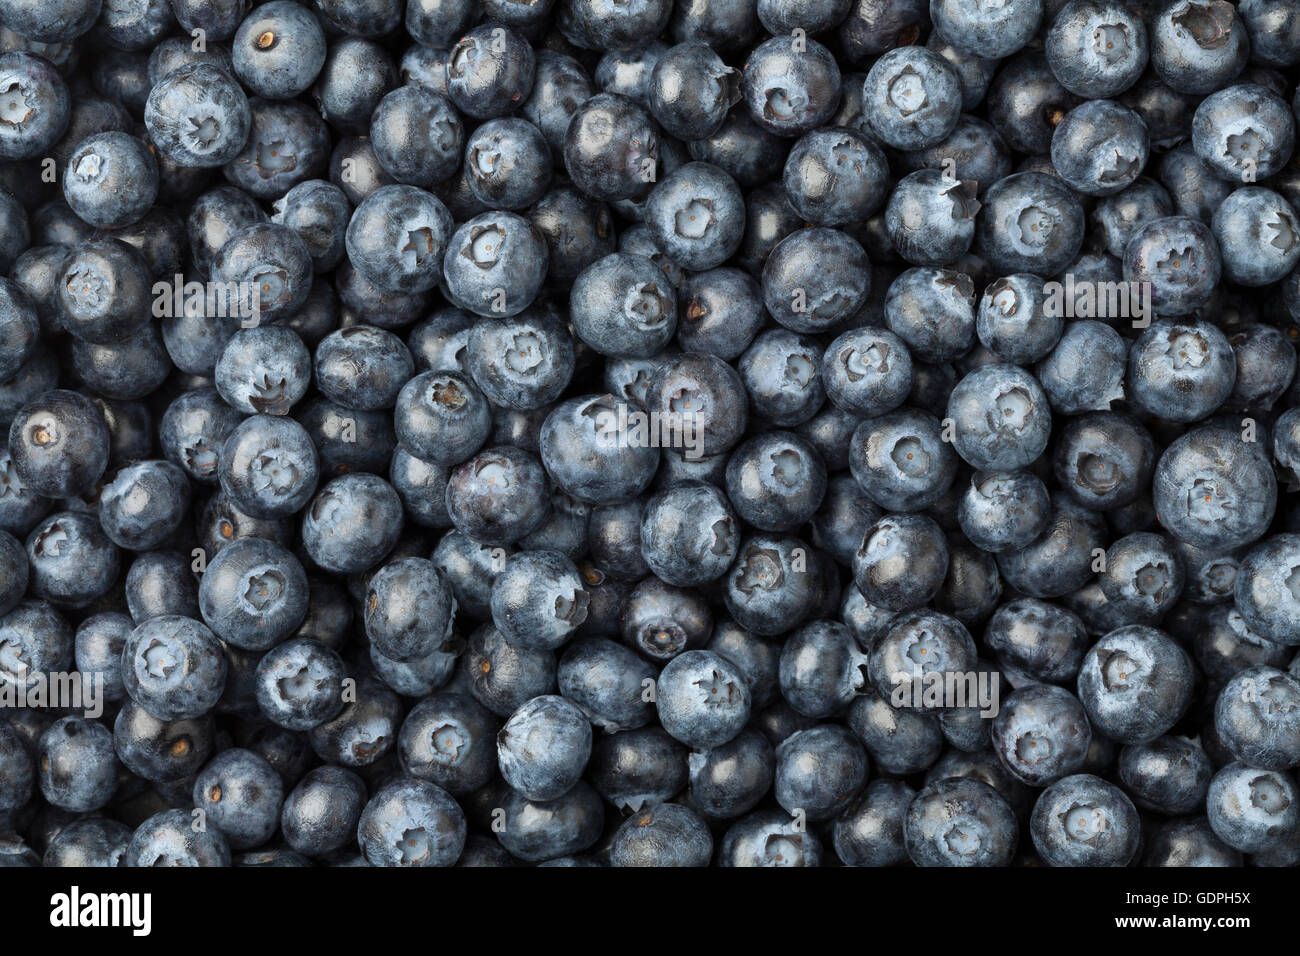 Blue berries full frame close up Stock Photo